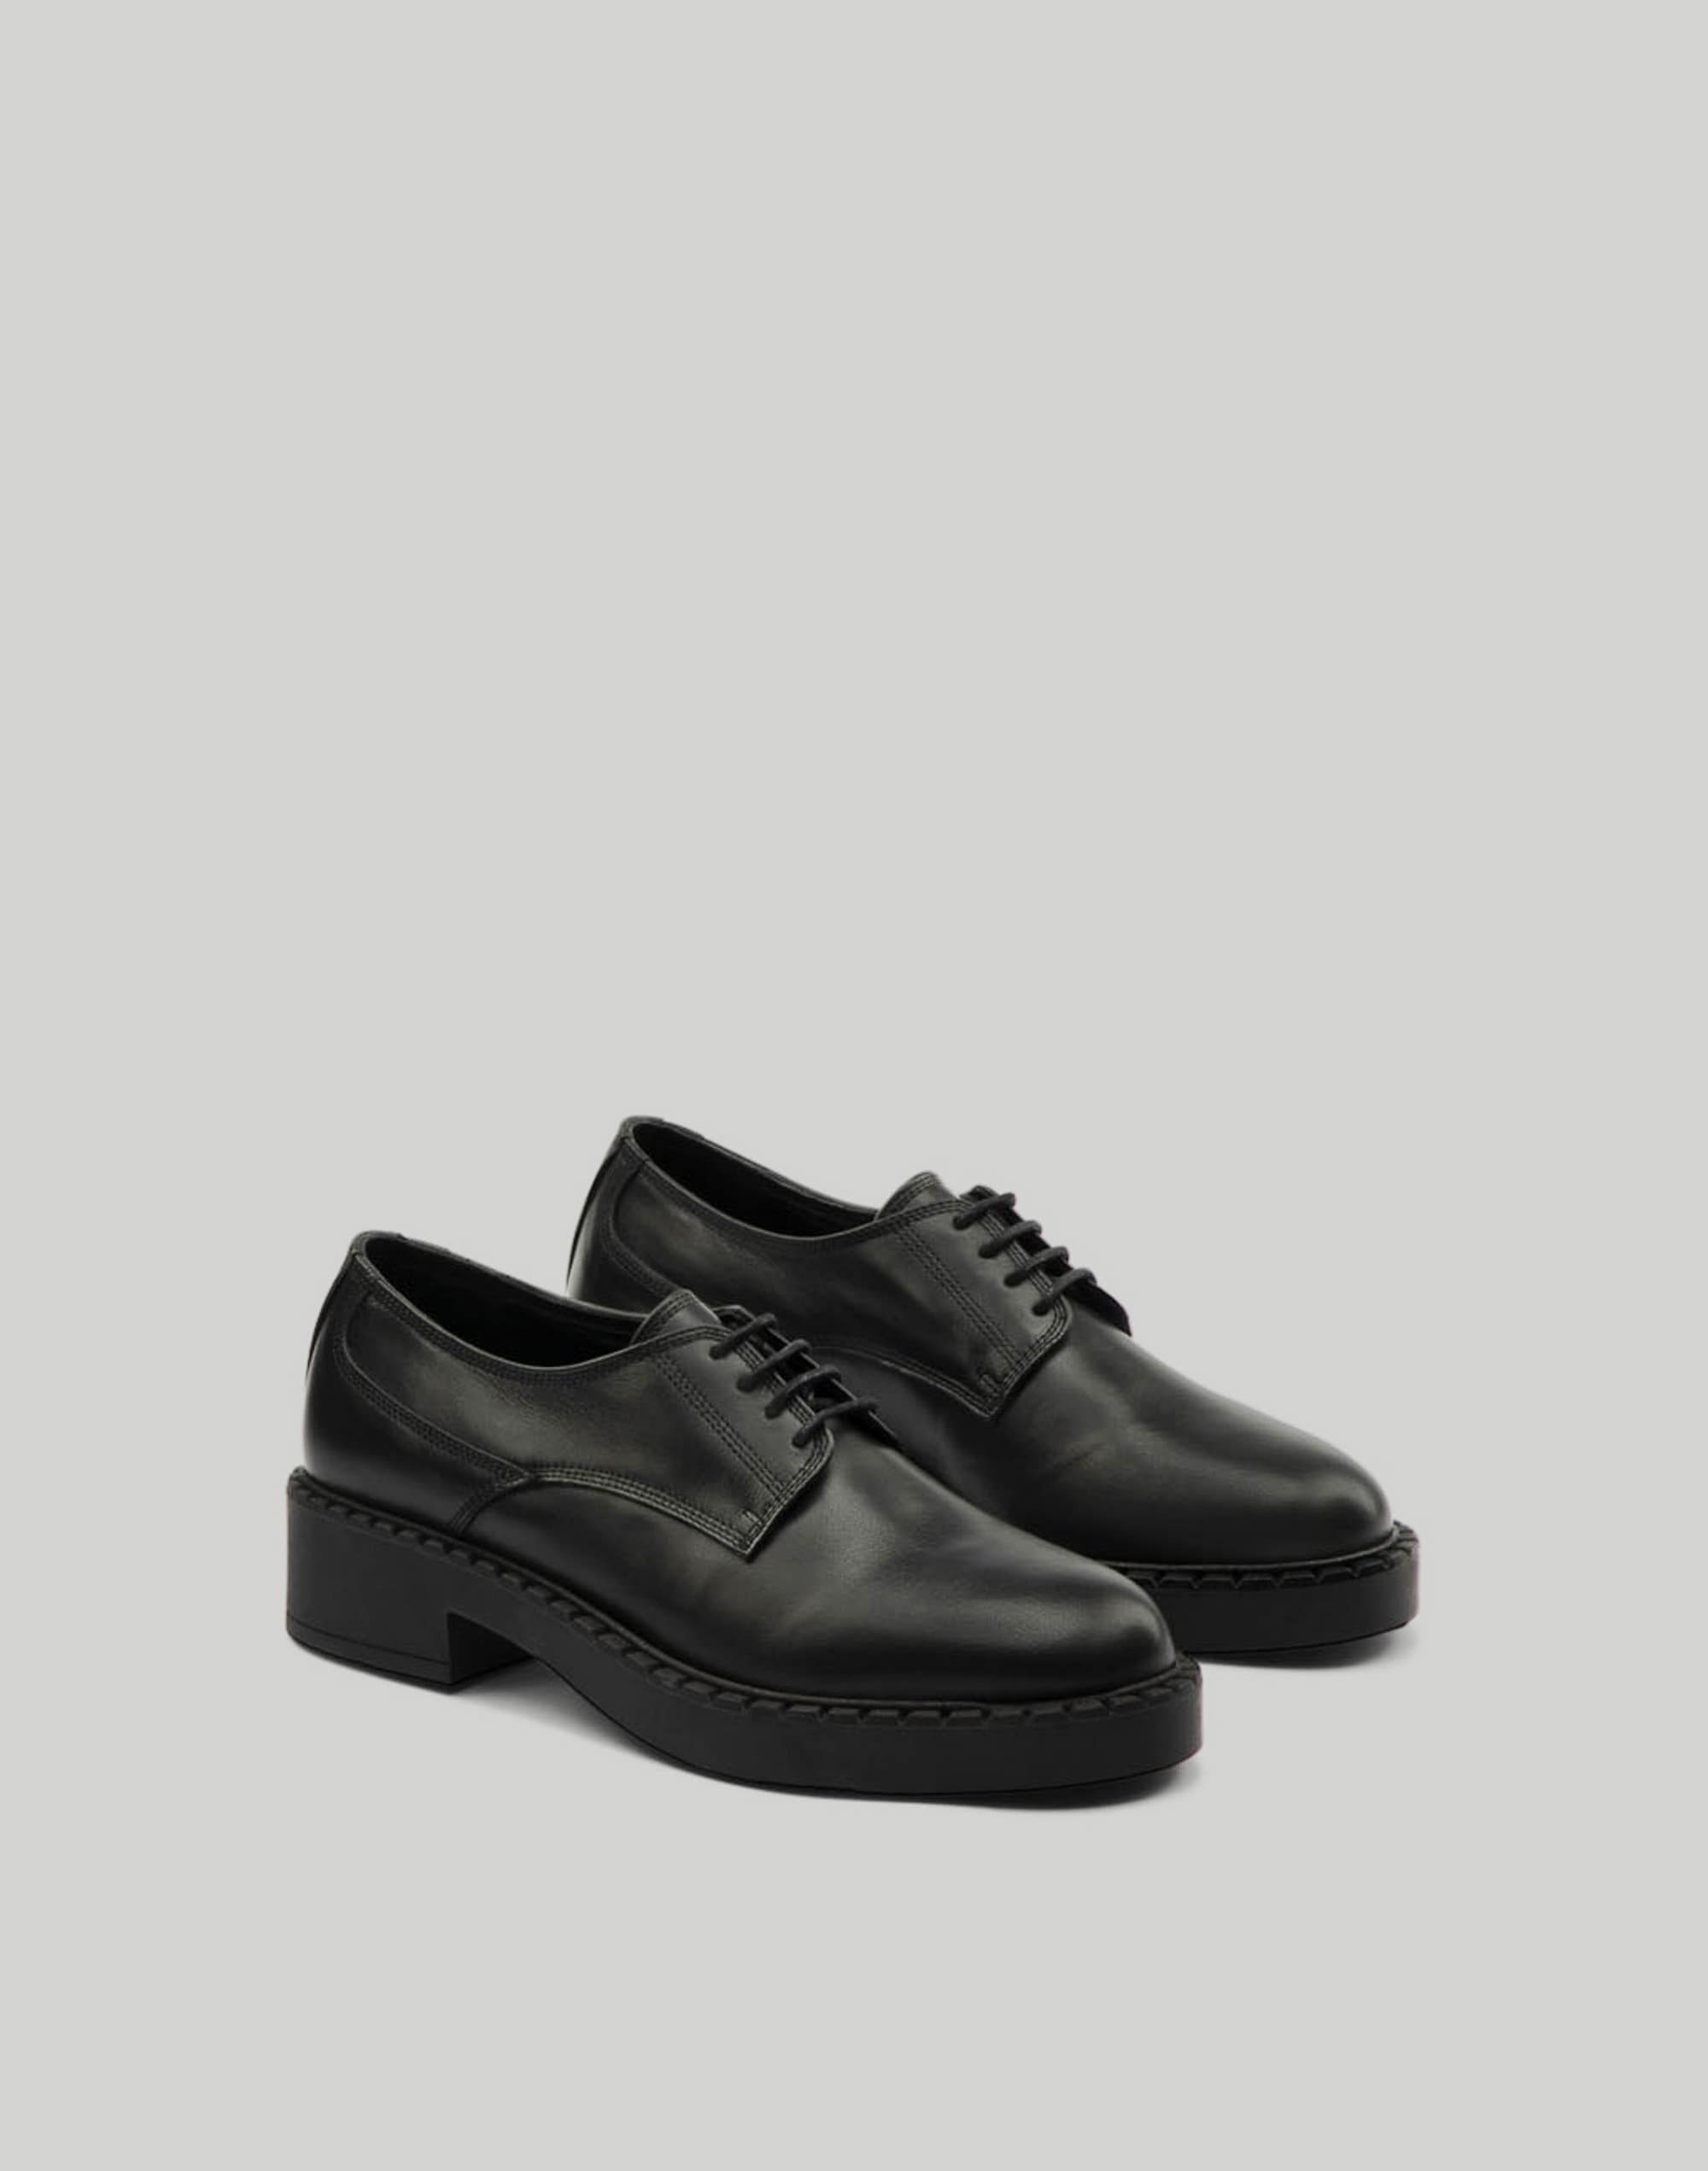 Maguire Parada Oxford Loafers